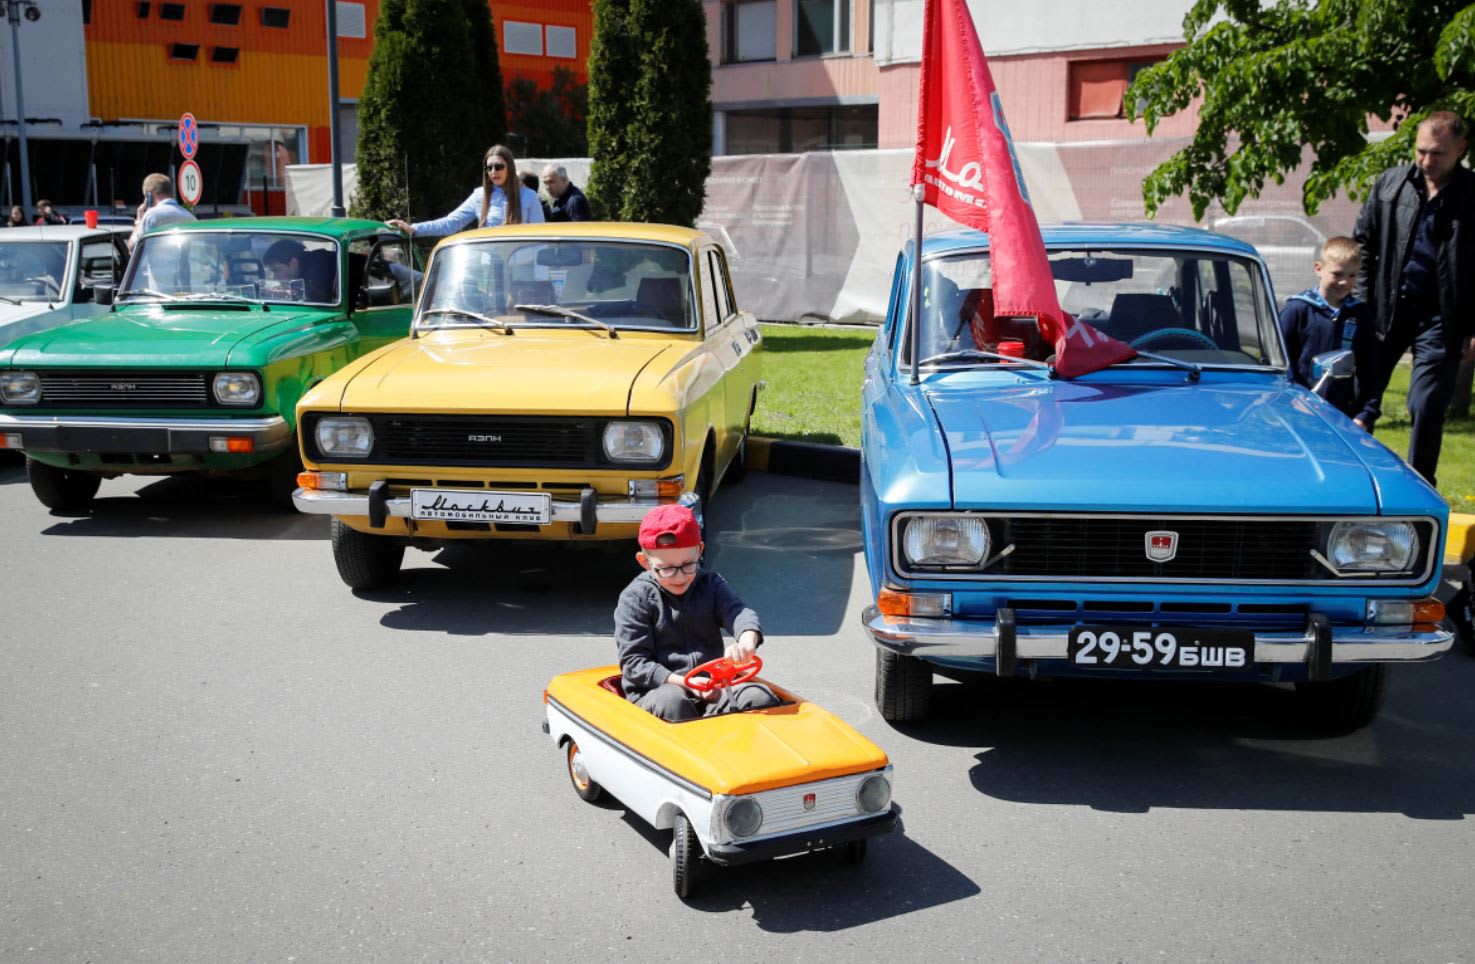 Russians divided over plans to reboot classic Soviet-era car